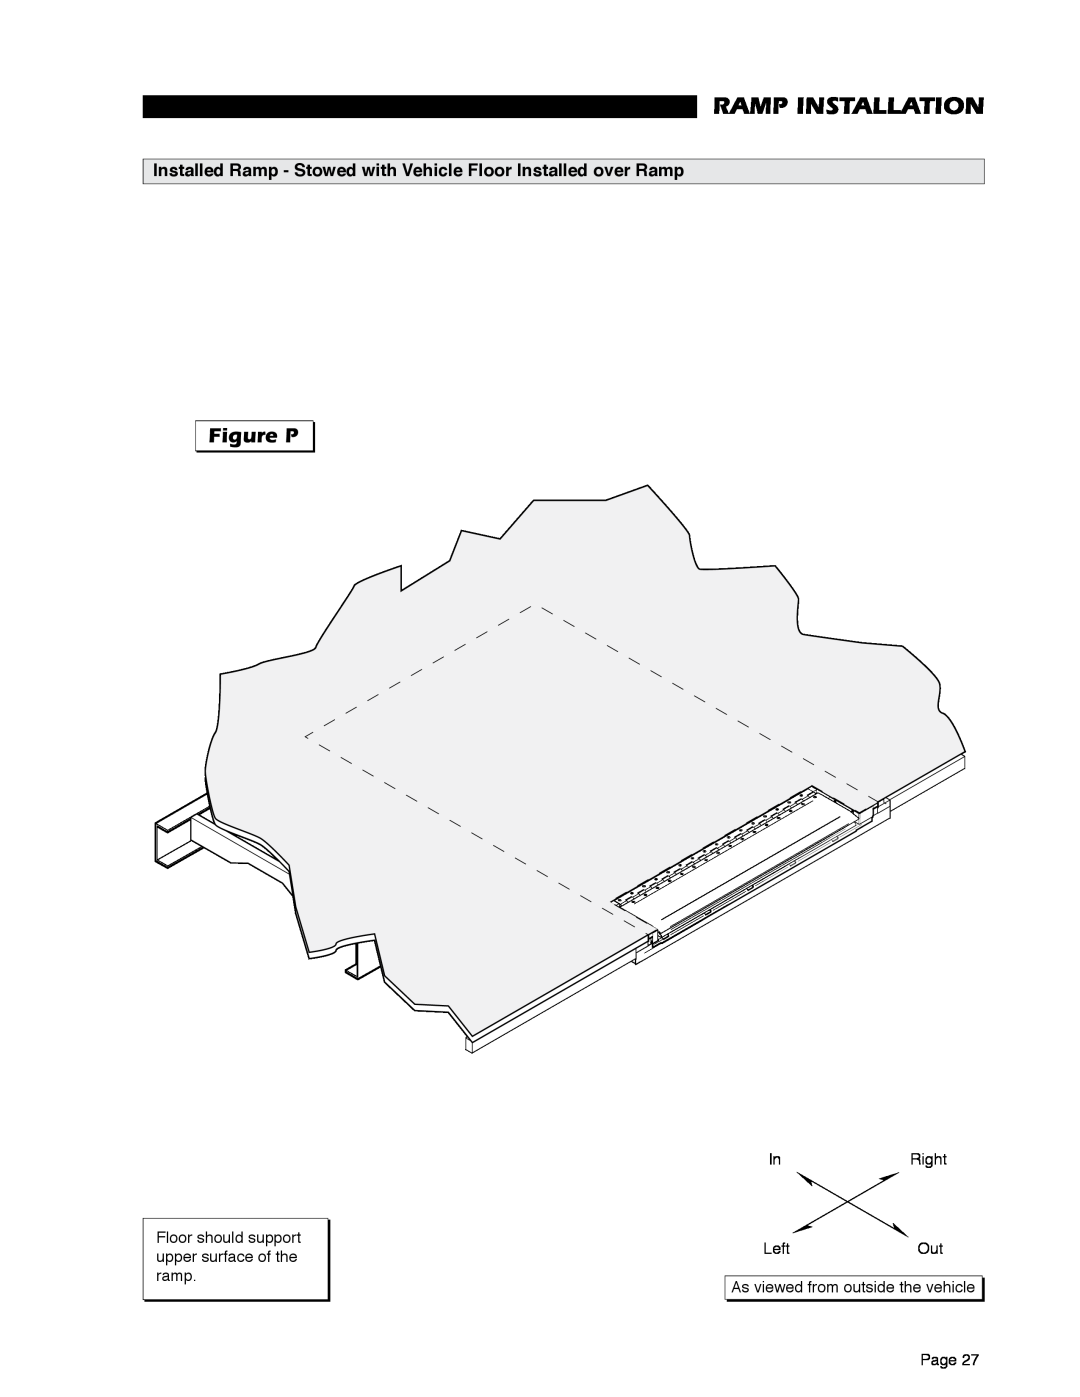 Braun RA500 service manual Figure P, Ramp Installation, Floor should support upper surface of the ramp, Left 